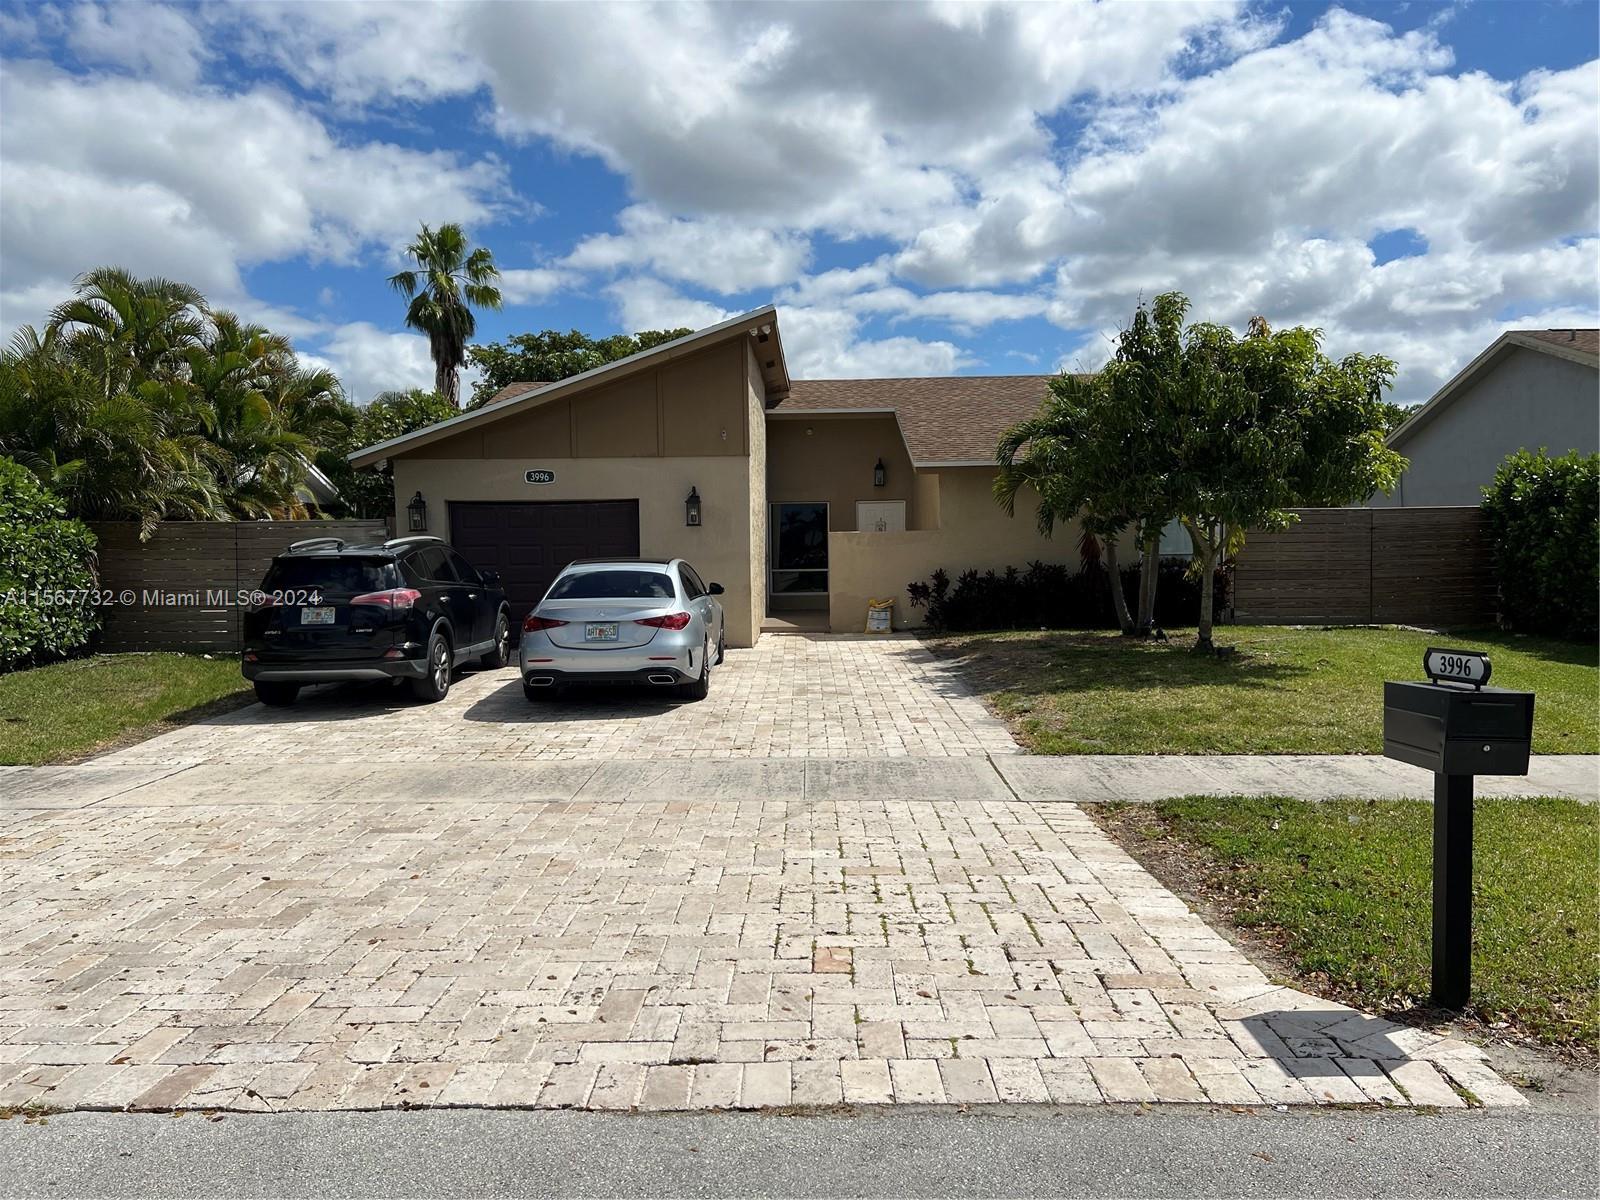 Very spacious 3 bedroom, 1 office and 2 bath pool home. Tons of renovations including shingle roof i